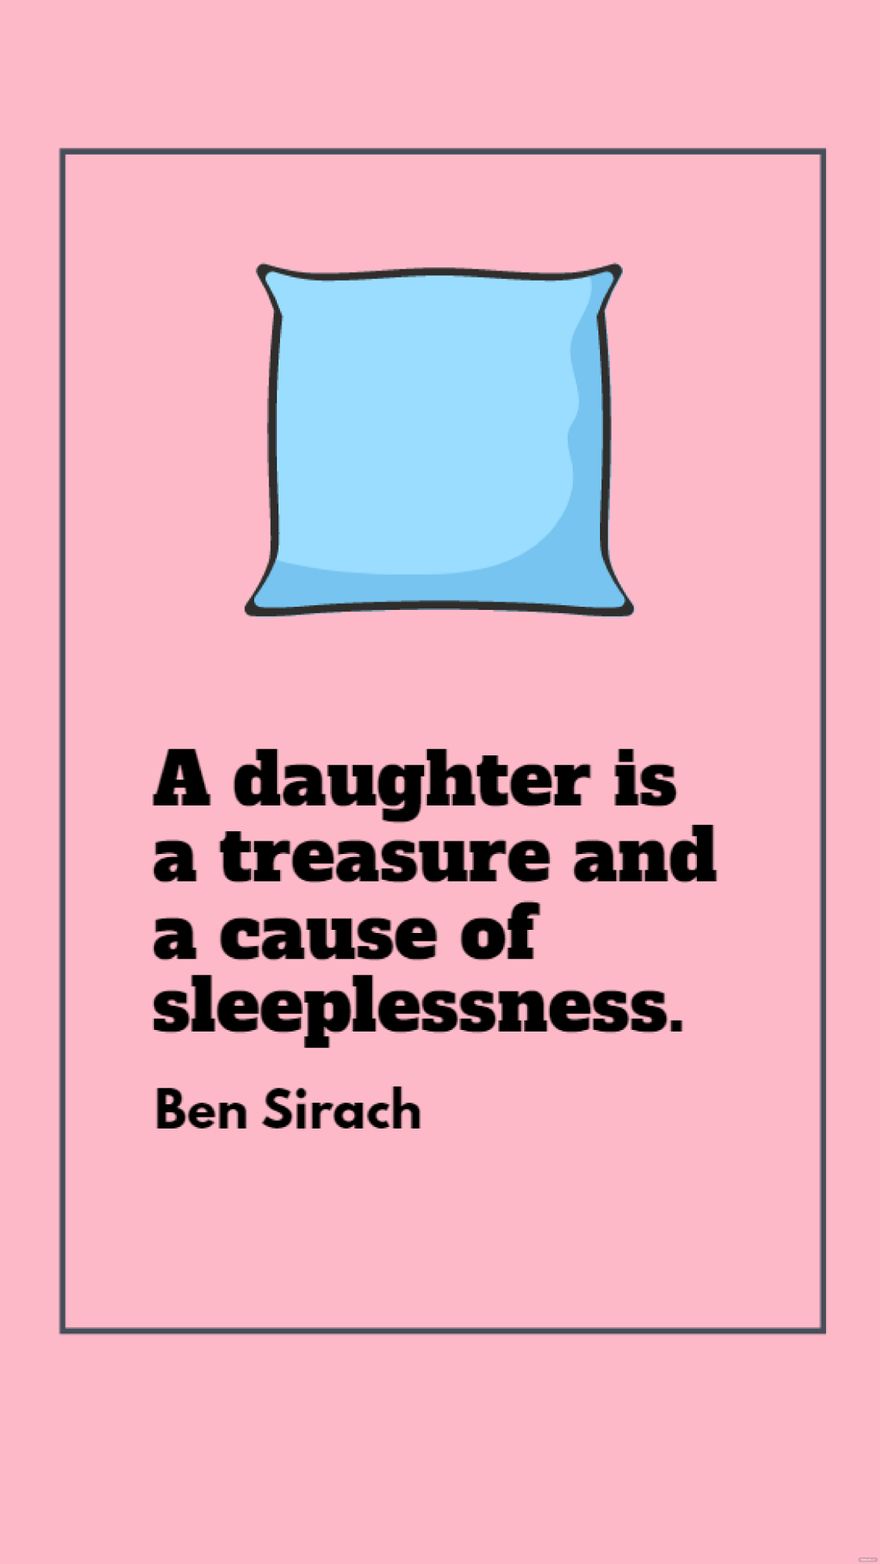 Free Ben Sirach - A daughter is a treasure and a cause of sleeplessness. in JPG